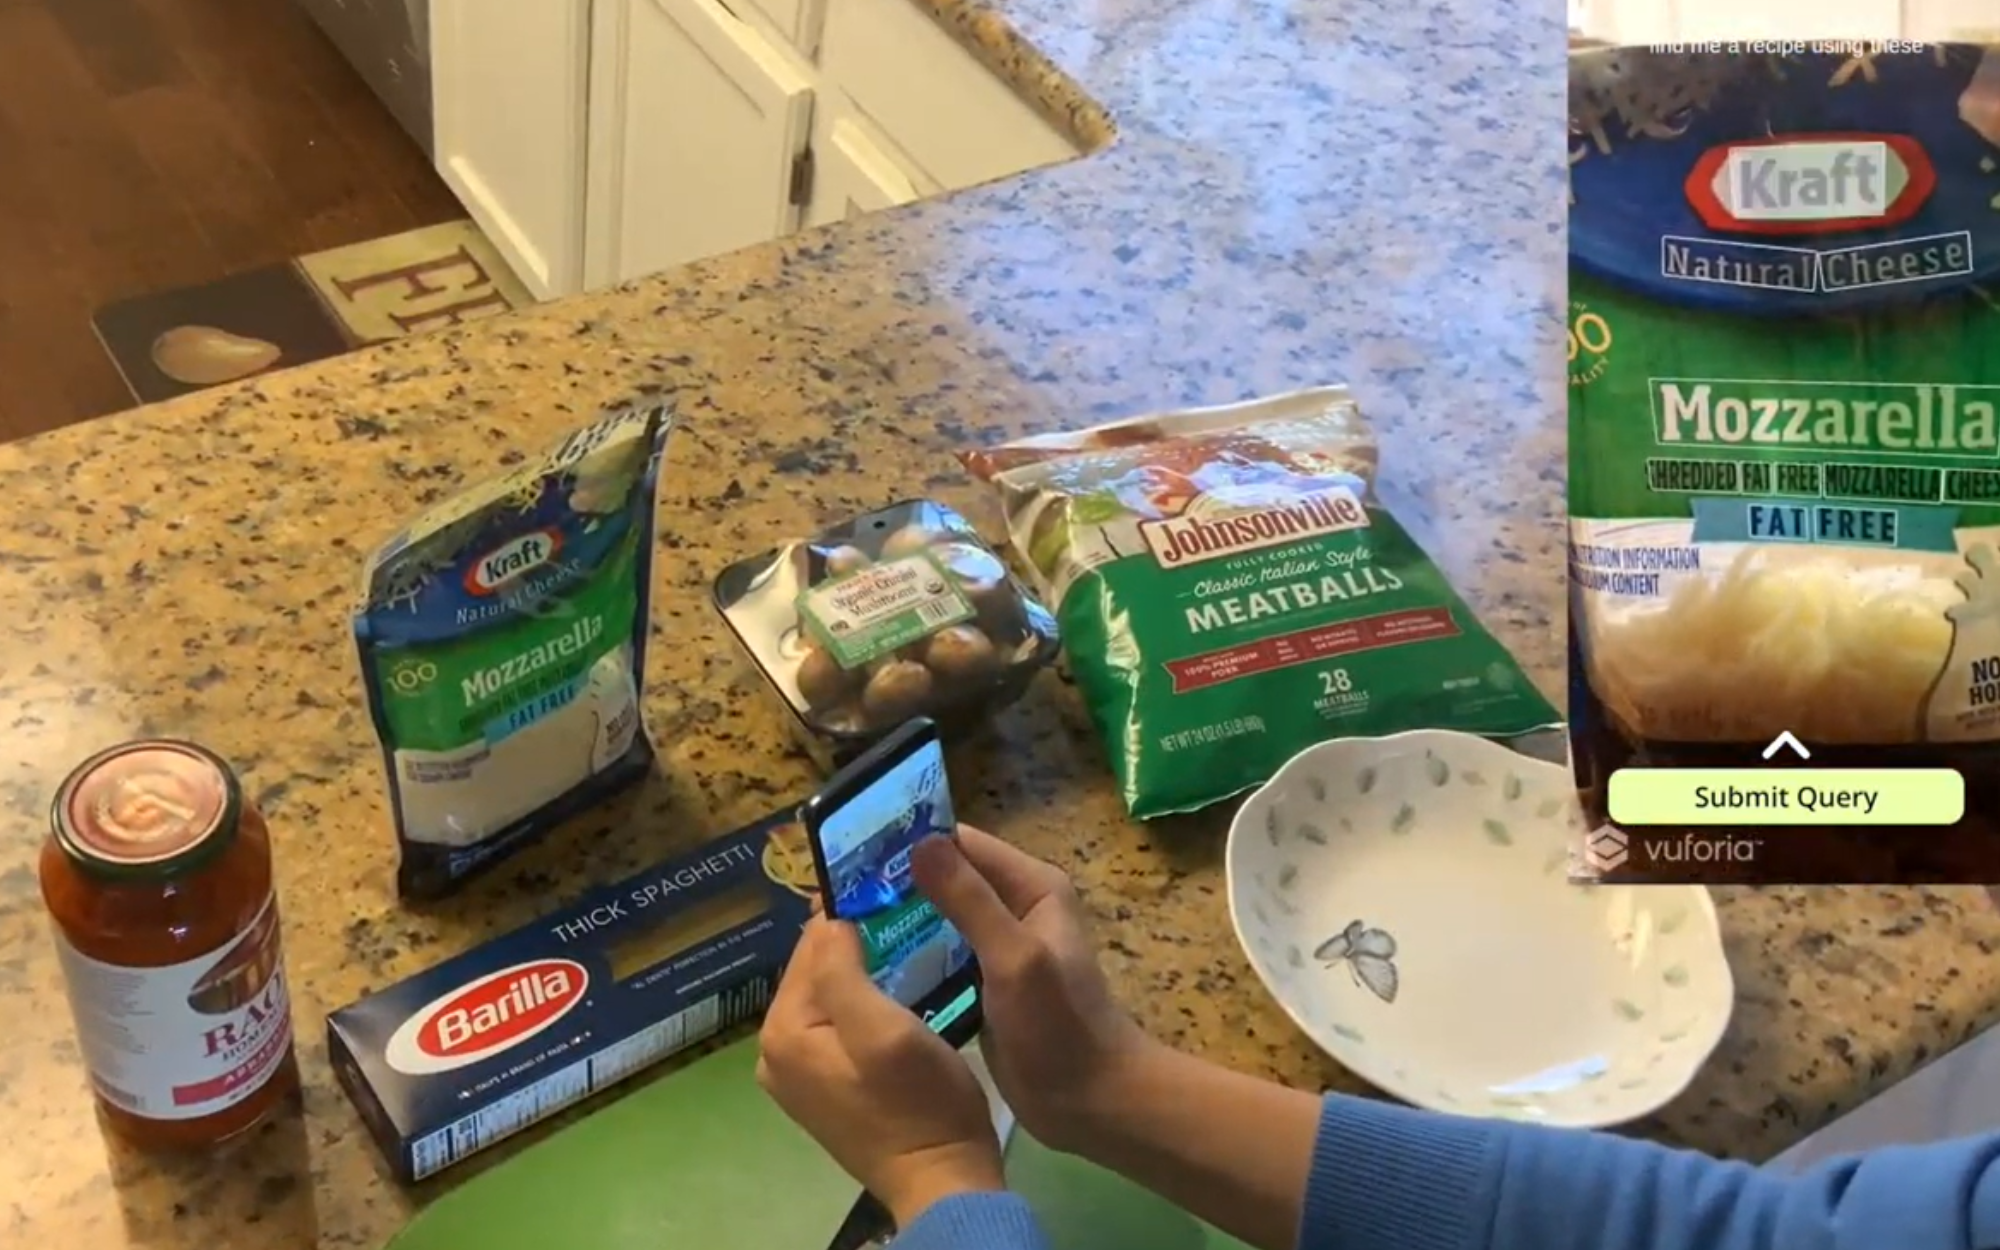 A person pointing their phone at an ingredient after asking 'find me a recipe that uses these.' TouchVA generates a touch interface, which users can tap different objects and texts to include them in their query.